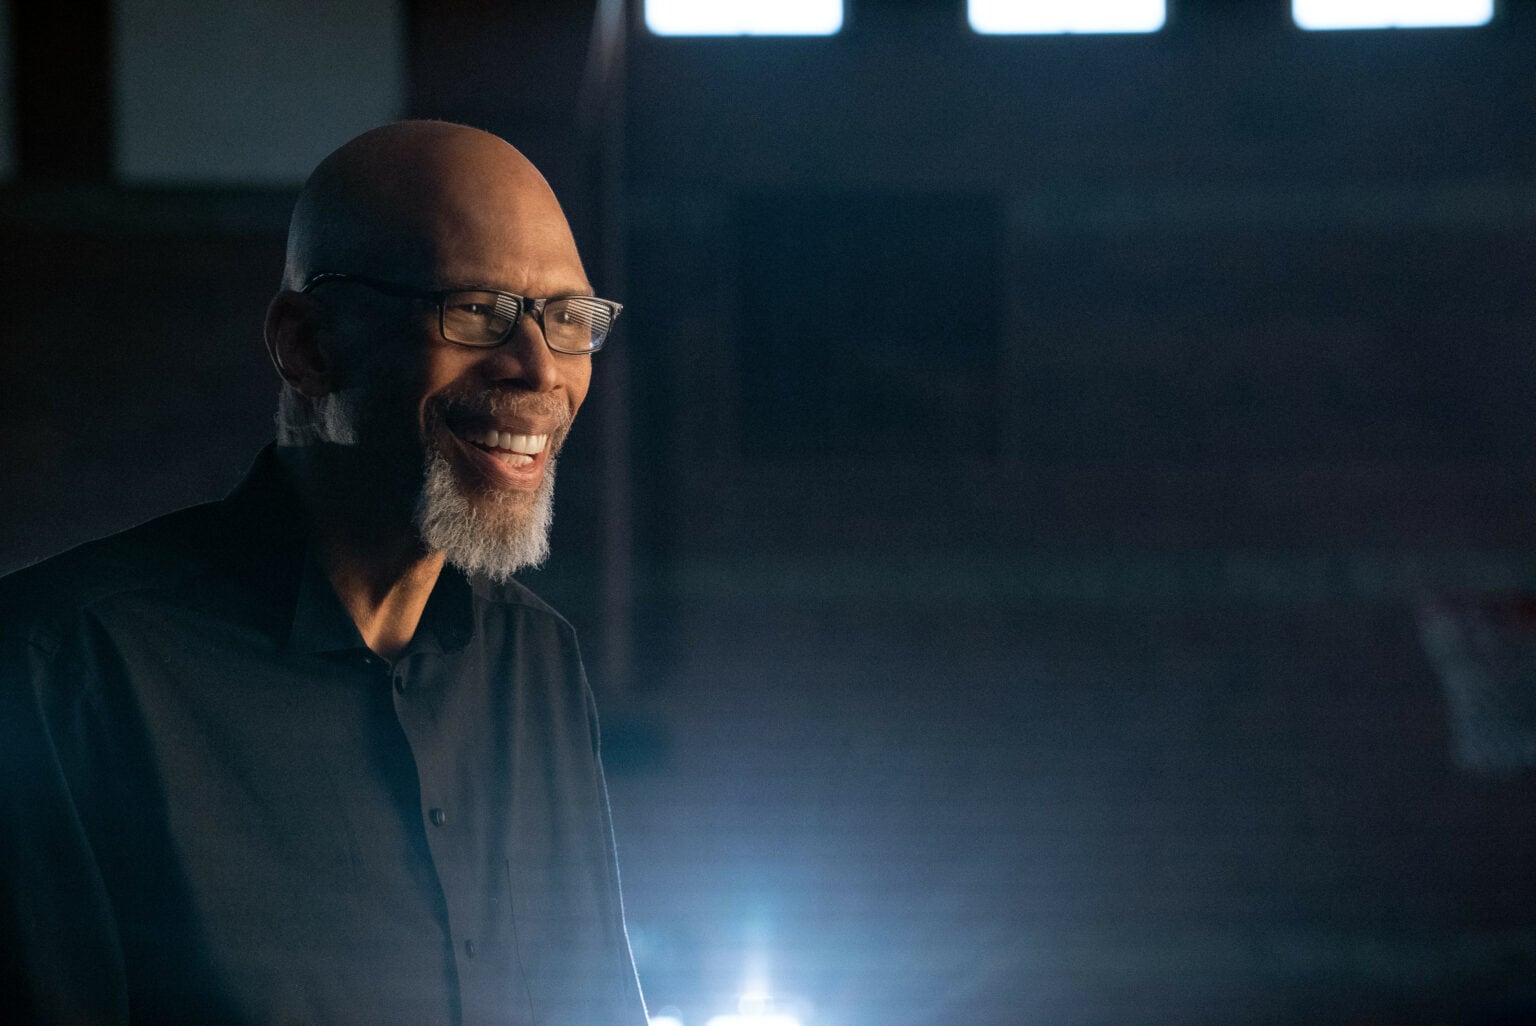 Dear... review Apple TV+ season 2: High-minded celebrities like Kareem Abdul-Jabbar get the celebration they deserve in this Apple TV+ series.